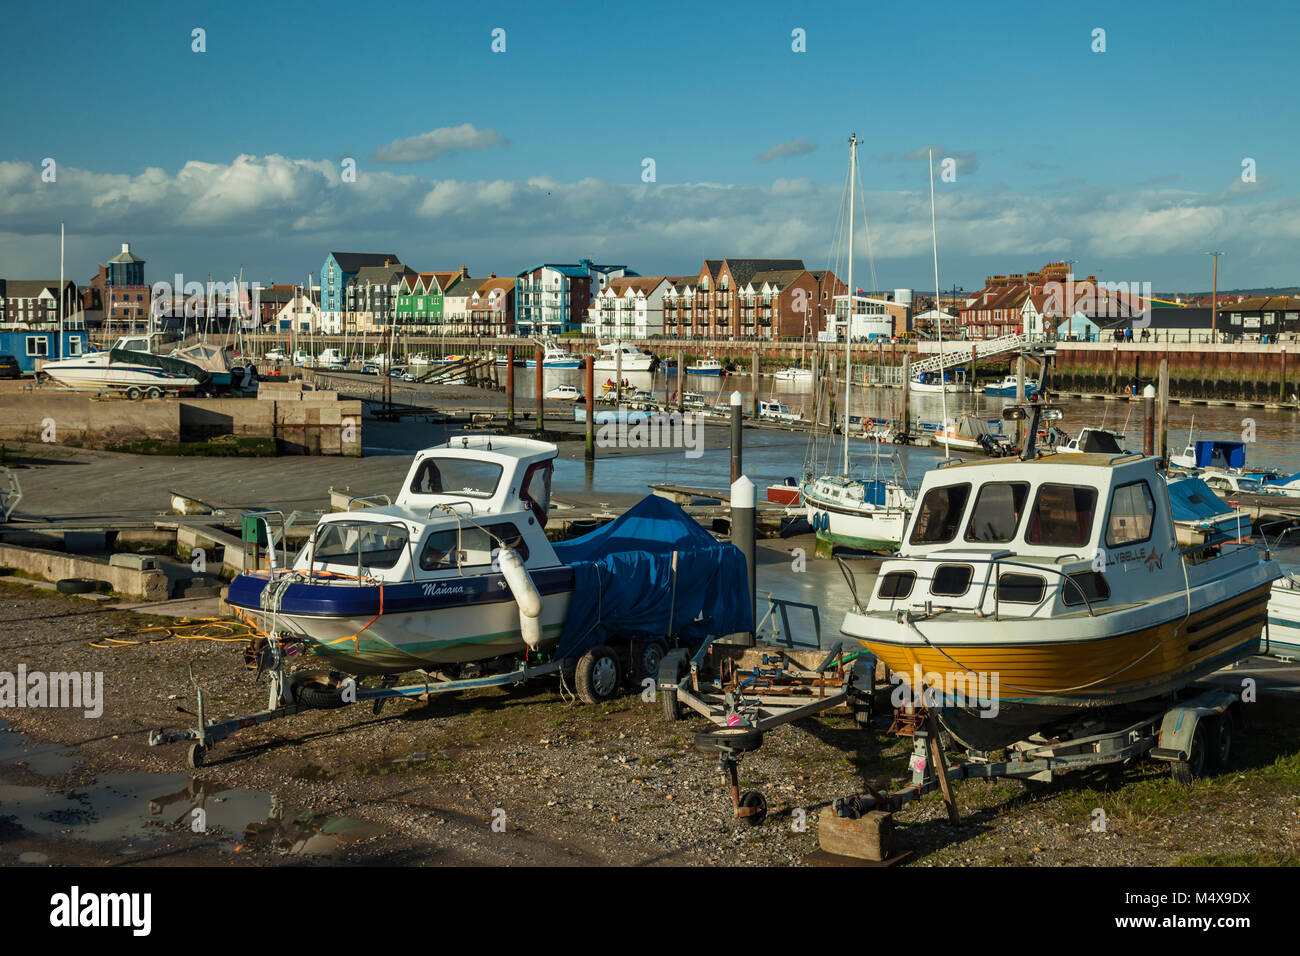 Winter afternoon in Littlehampton, West Sussex, England. Stock Photo